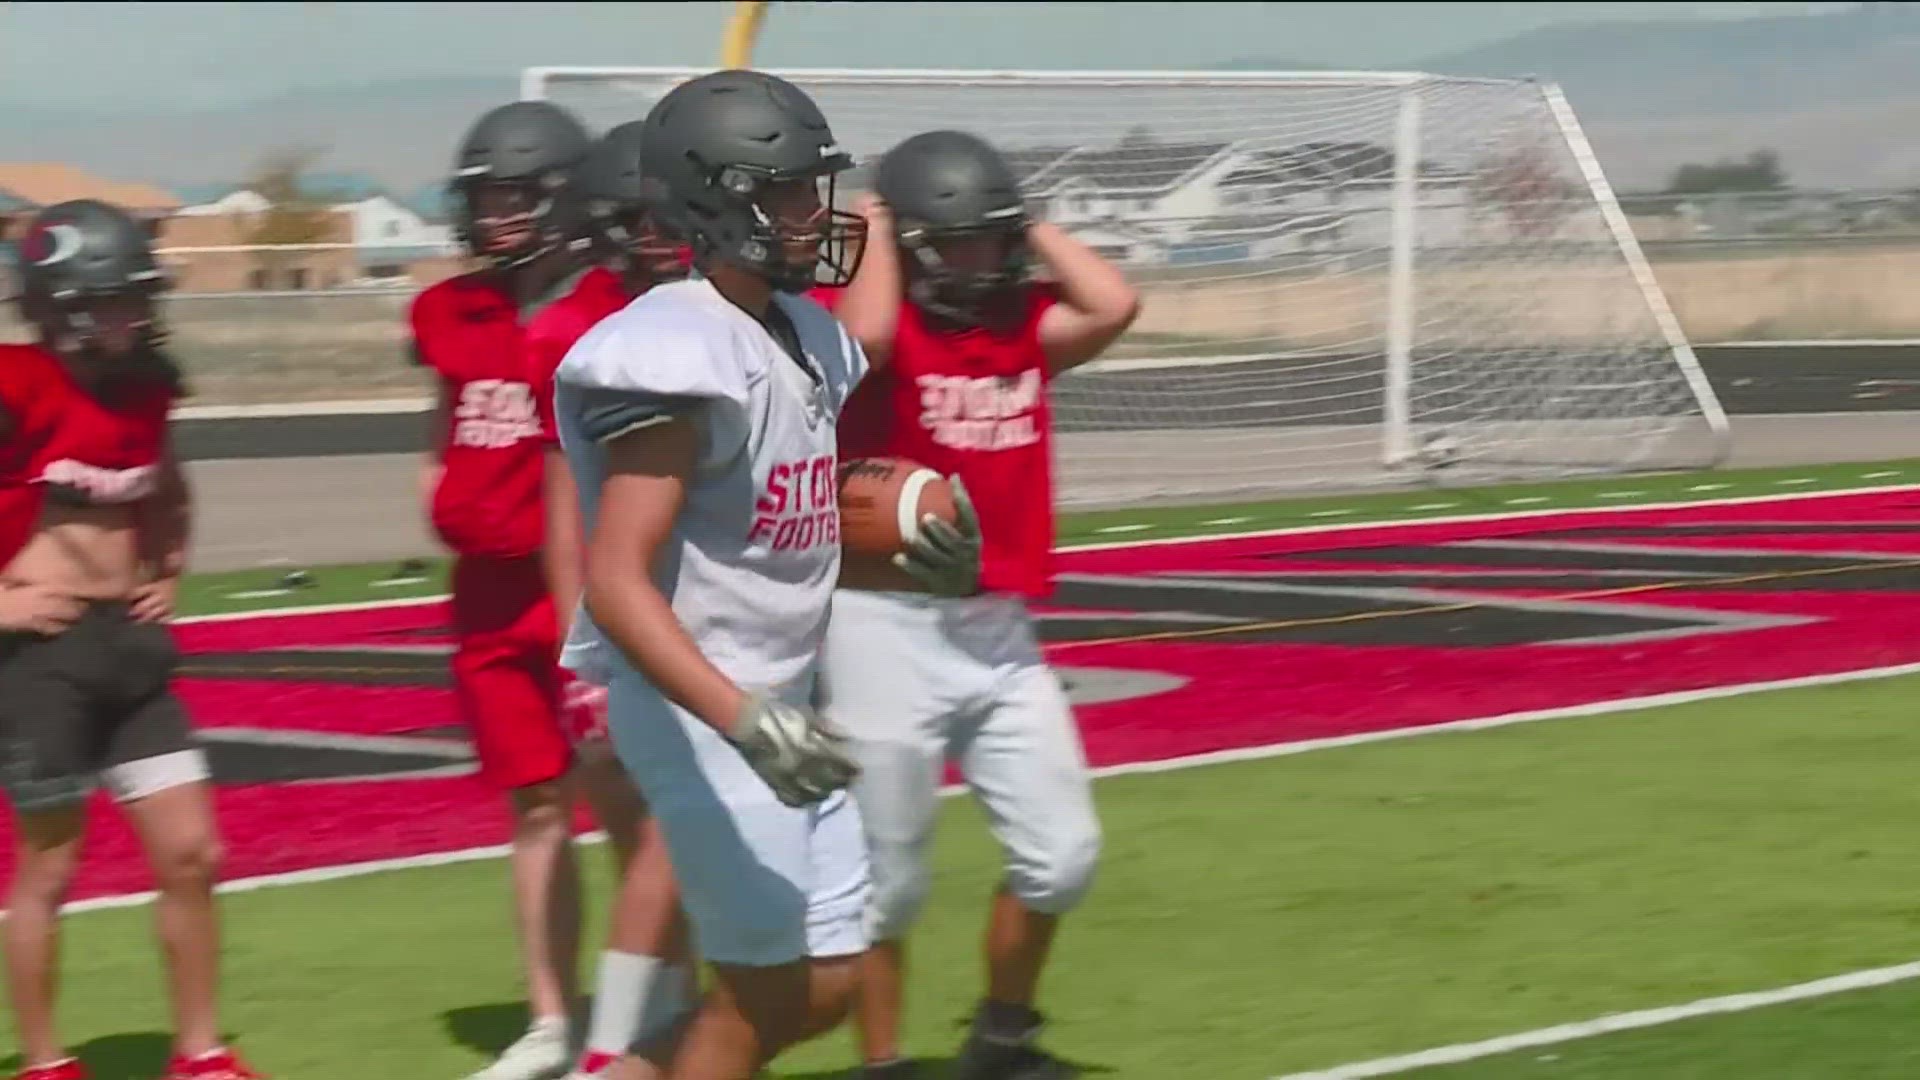 With fall sports around the corner, and temperatures floating around triple digits, Saltzer Health is urging coaches, parents and players to take precautions.